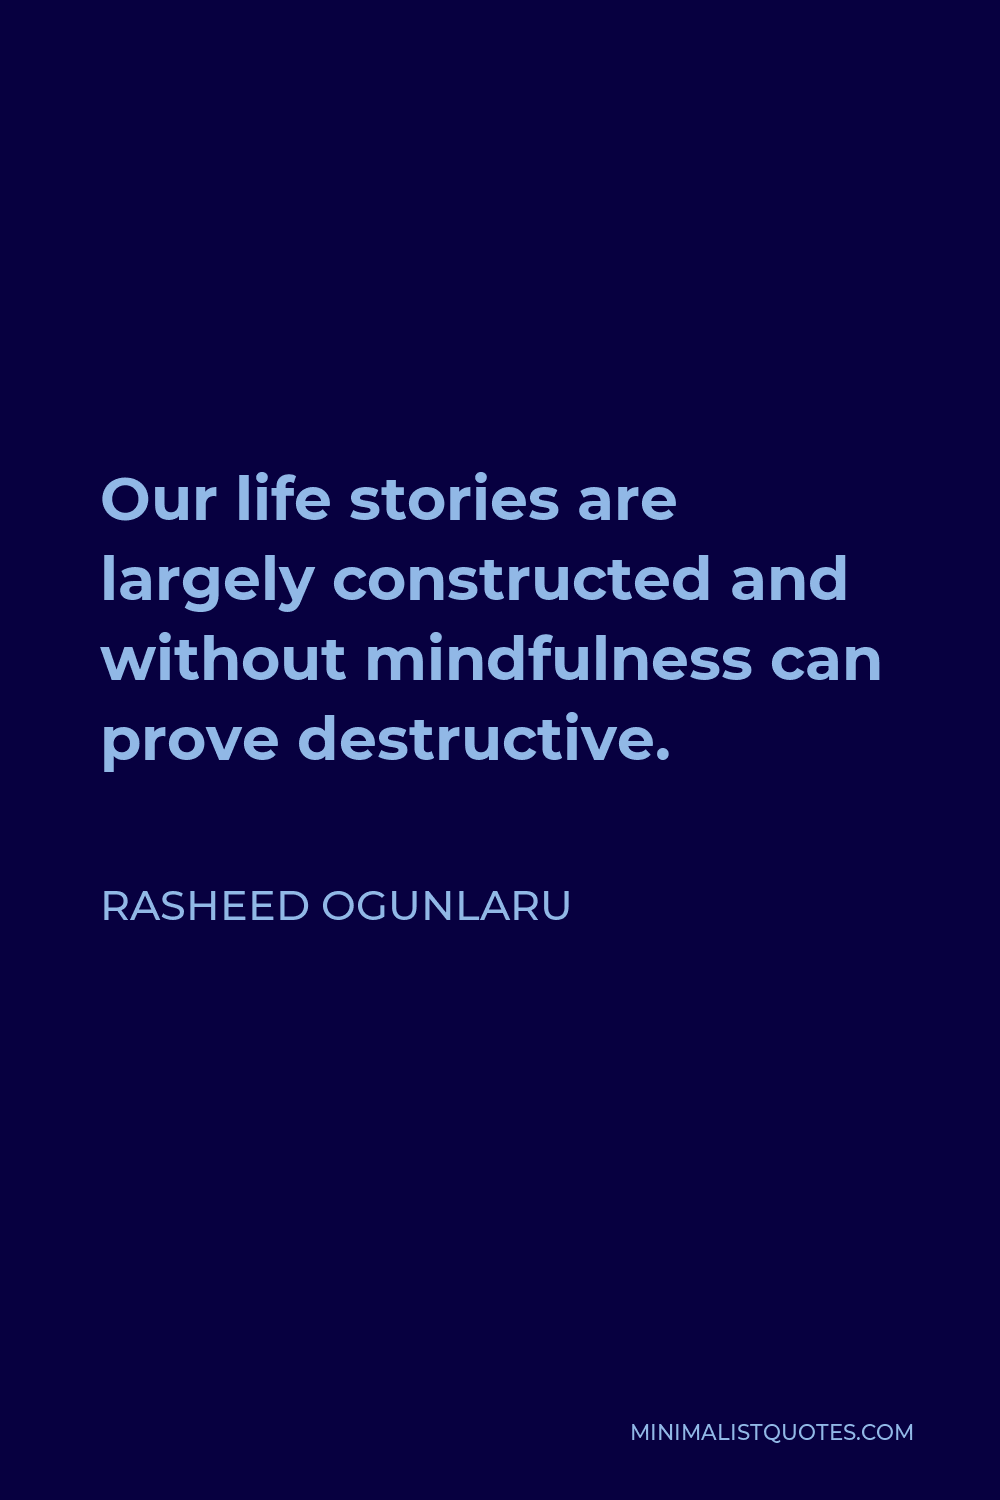 Rasheed Ogunlaru Quote - Our life stories are largely constructed and without mindfulness can prove destructive.